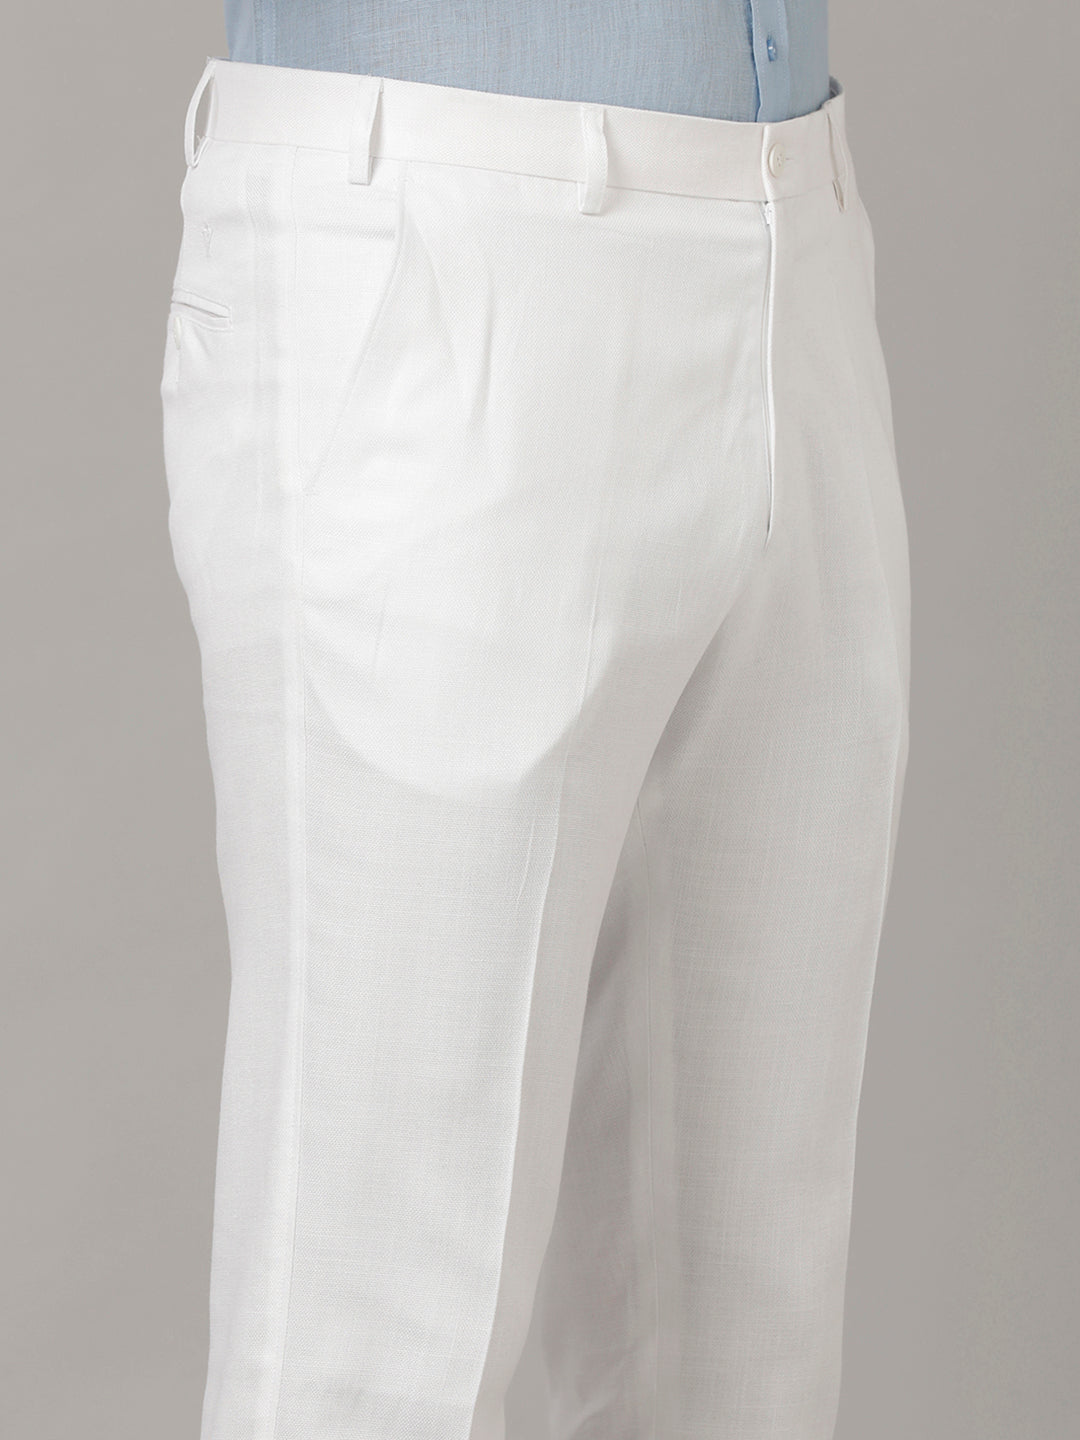 Mens Regular Fit Cotton White Pants White Care-Zoom view